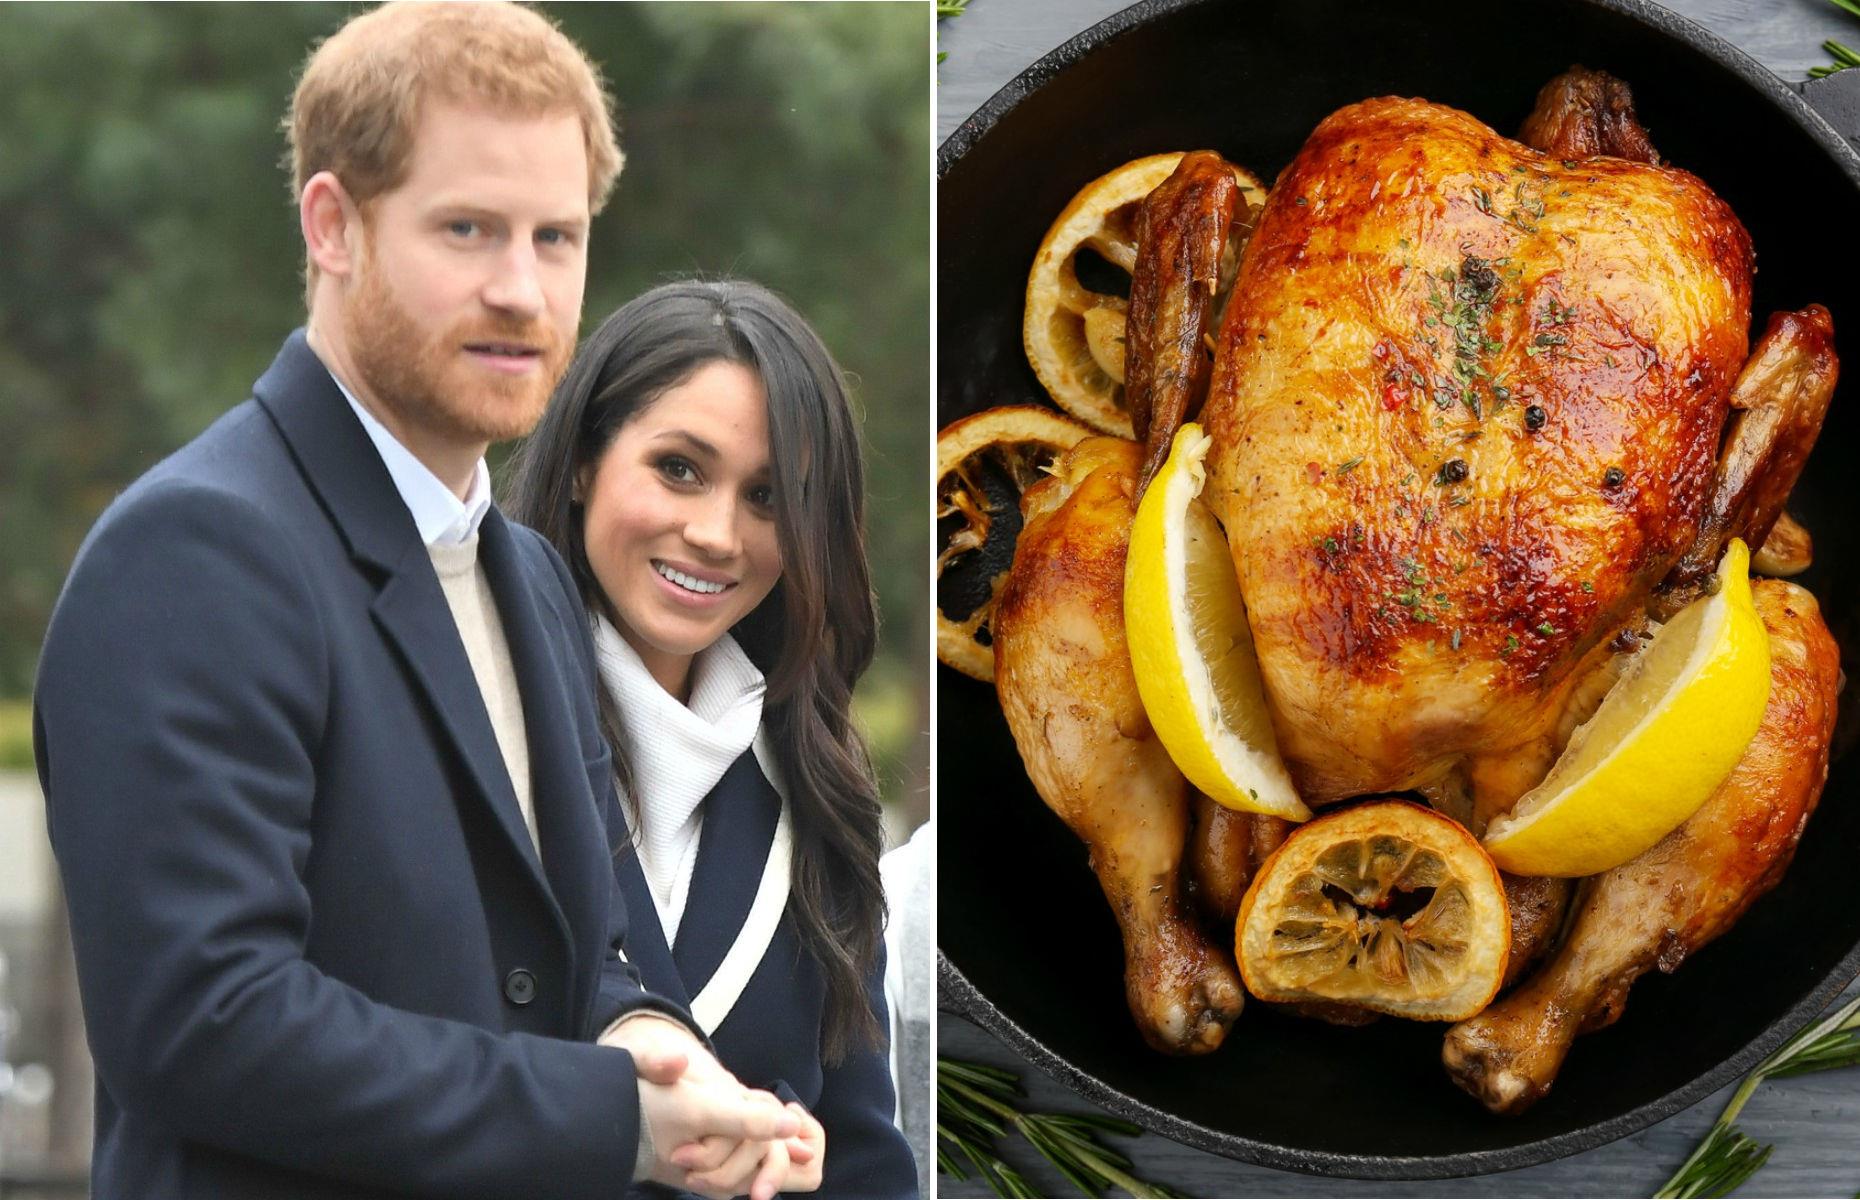 <p>When the Duke and Duchess of Sussex announced their engagement in November 2017, Harry revealed in a BBC interview that he’d popped the question as they were 'trying to roast a chicken'. In fact, in 2016, Meghan told <em>Good Housekeeping</em>: "There is nothing as delicious (or as impressive) as a perfectly roasted chicken. If you have an Ina Garten–level roasted chicken recipe, it's a game-changer."</p>